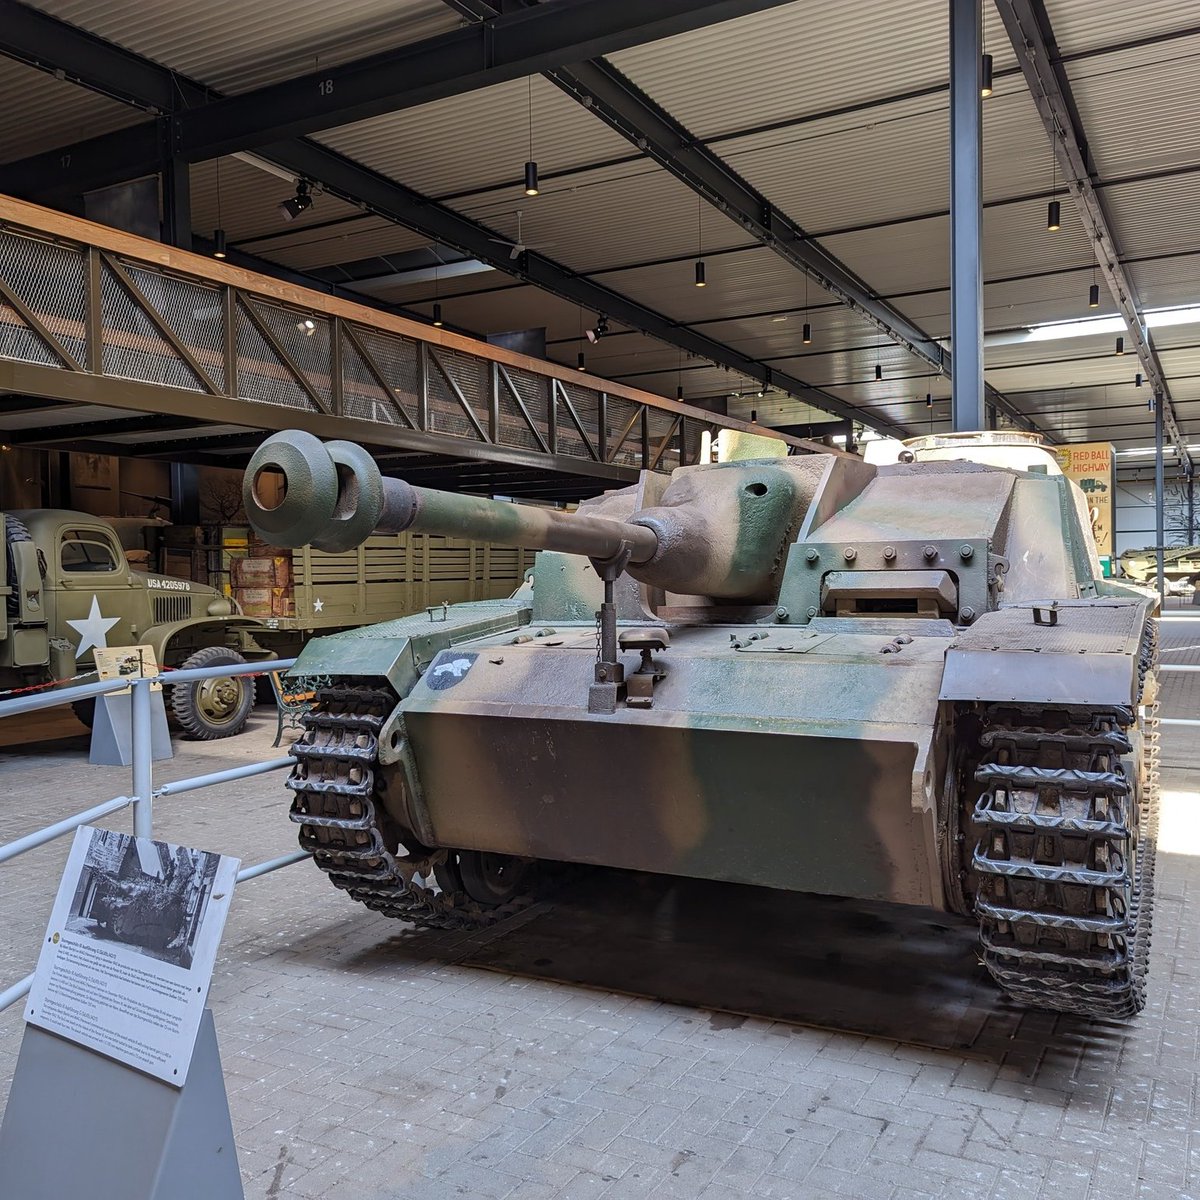 StuG III Ausf.G, Oorlogsmuseum Overloon. This vehicle still has bolted and welded applique armour, but also has late model features such as a cast mantlet with an opening for a coaxial machine gun. #tanks #history #WW2 

More photos of this StuG: facebook.com/TankArchivesBl…